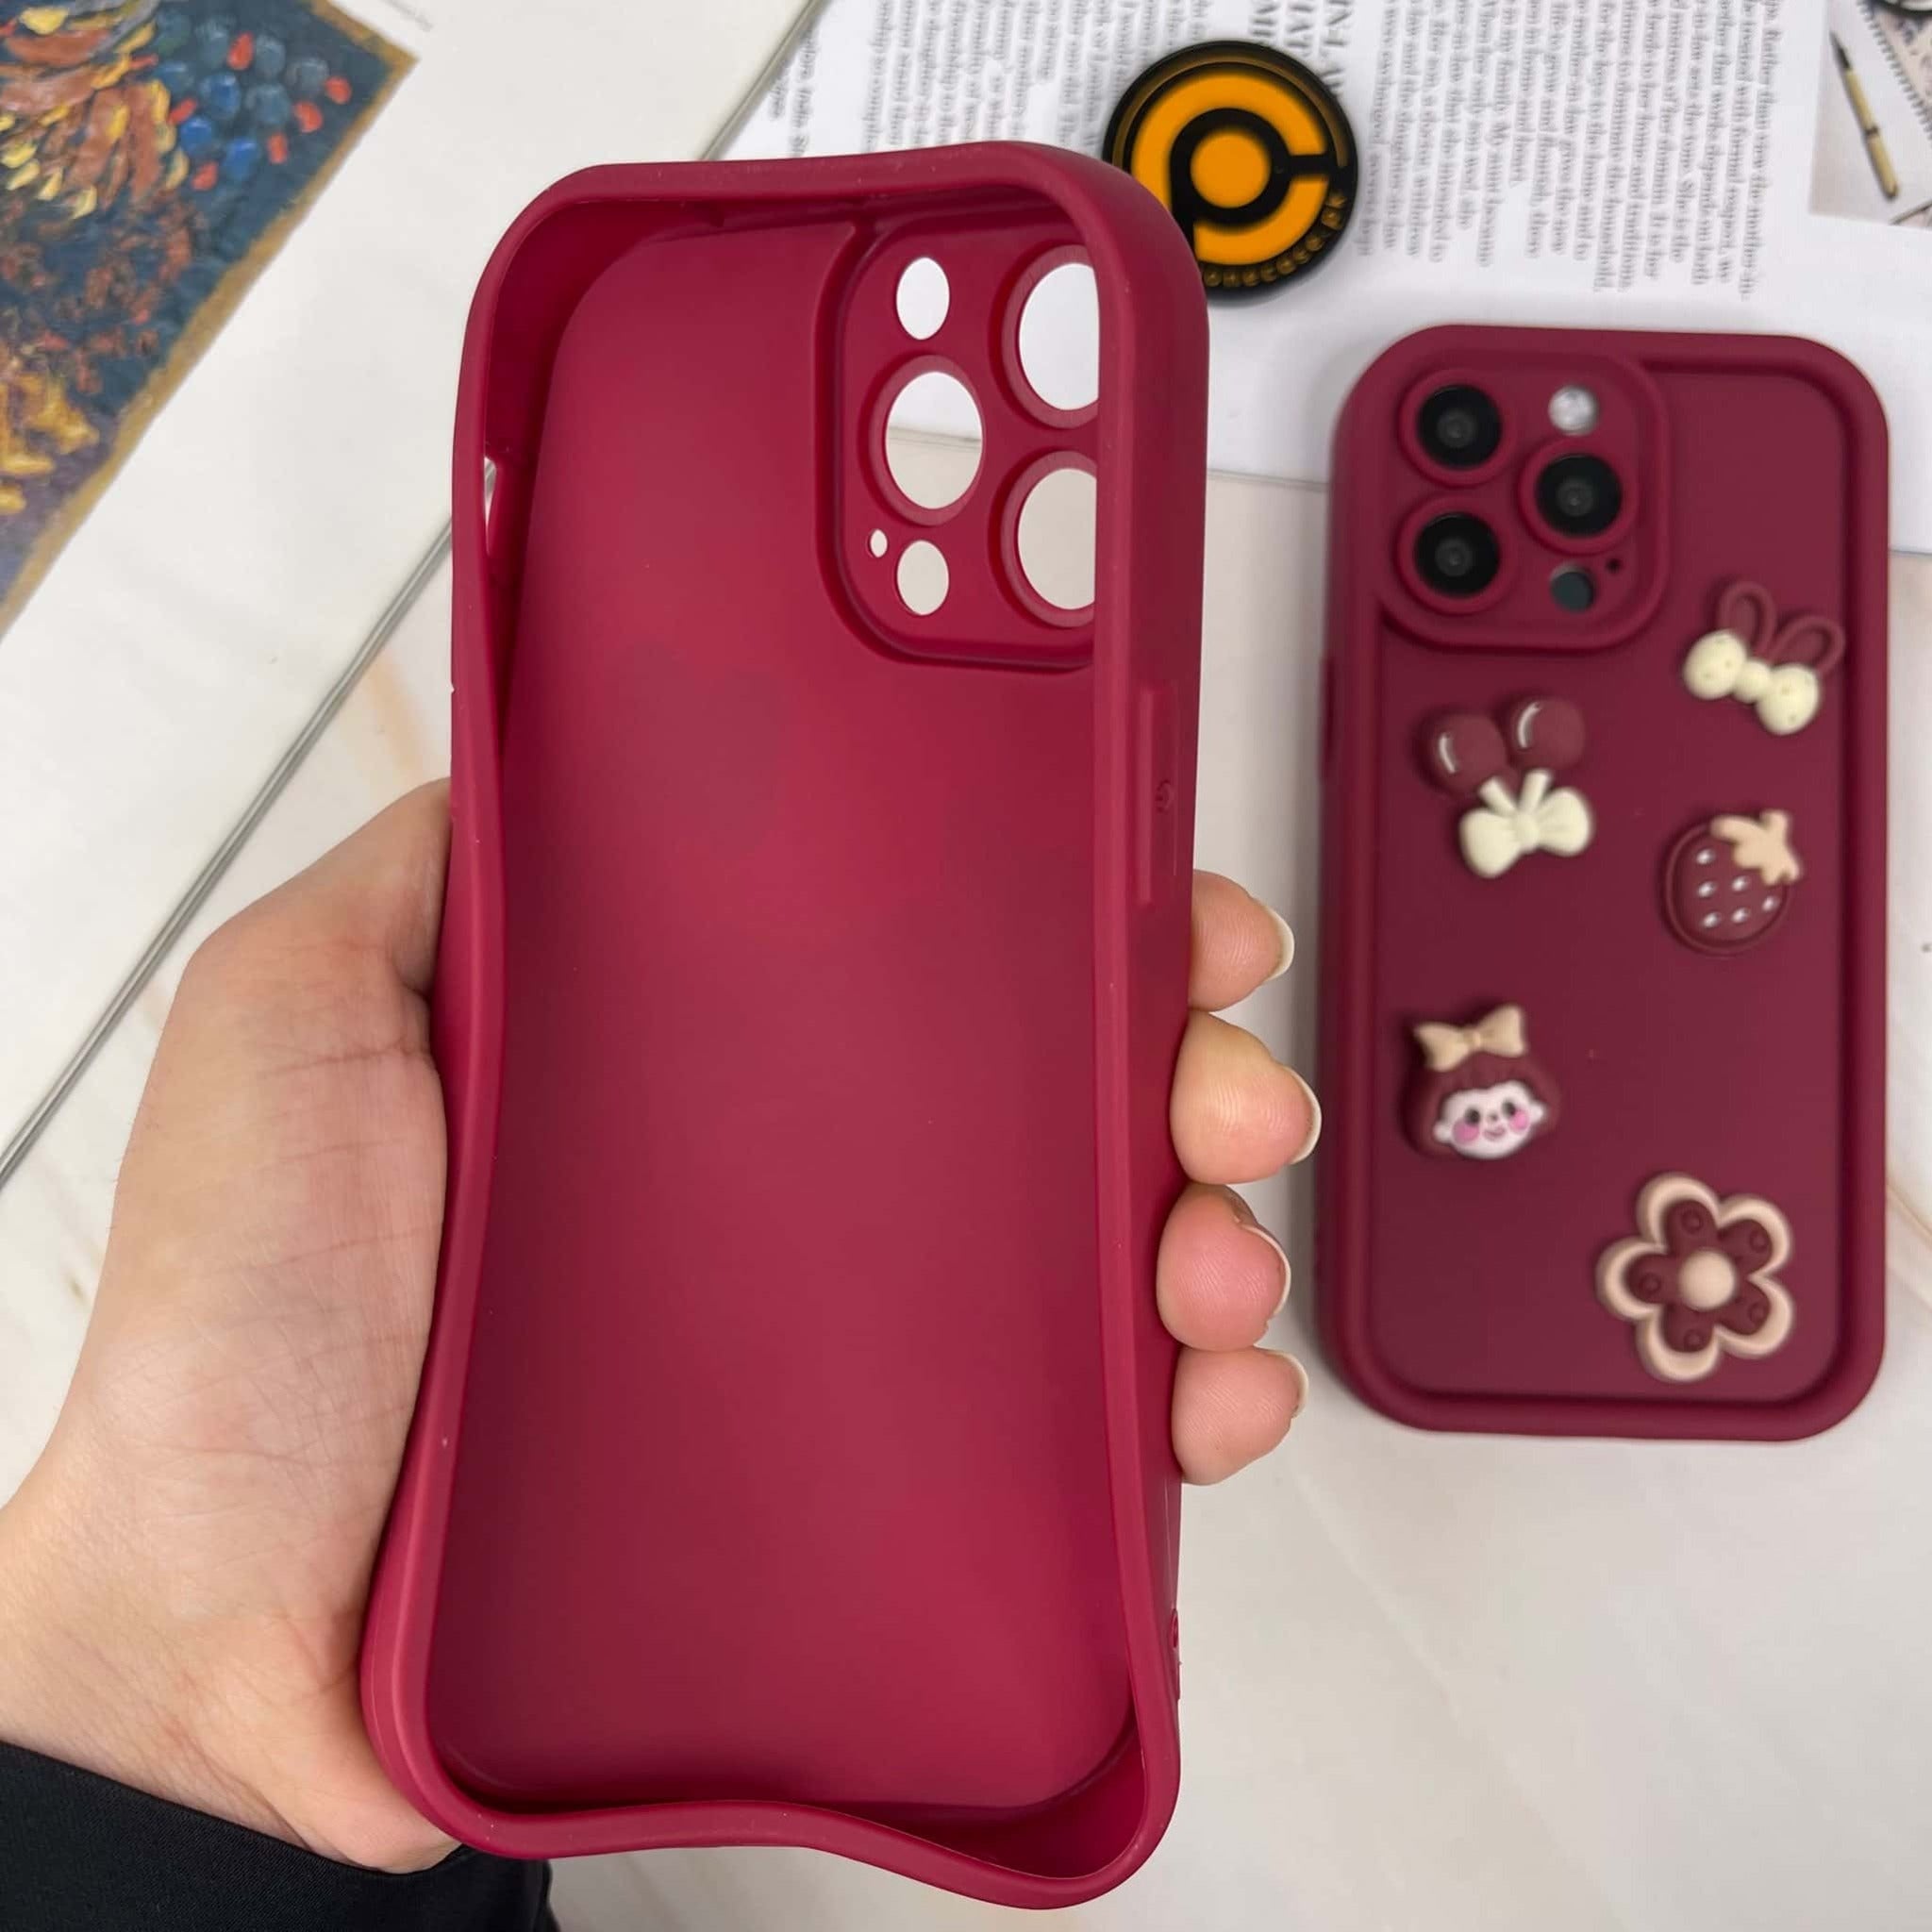 iPhone 11 Pro Cute 3D Cherry Flower Icons Silicon Case